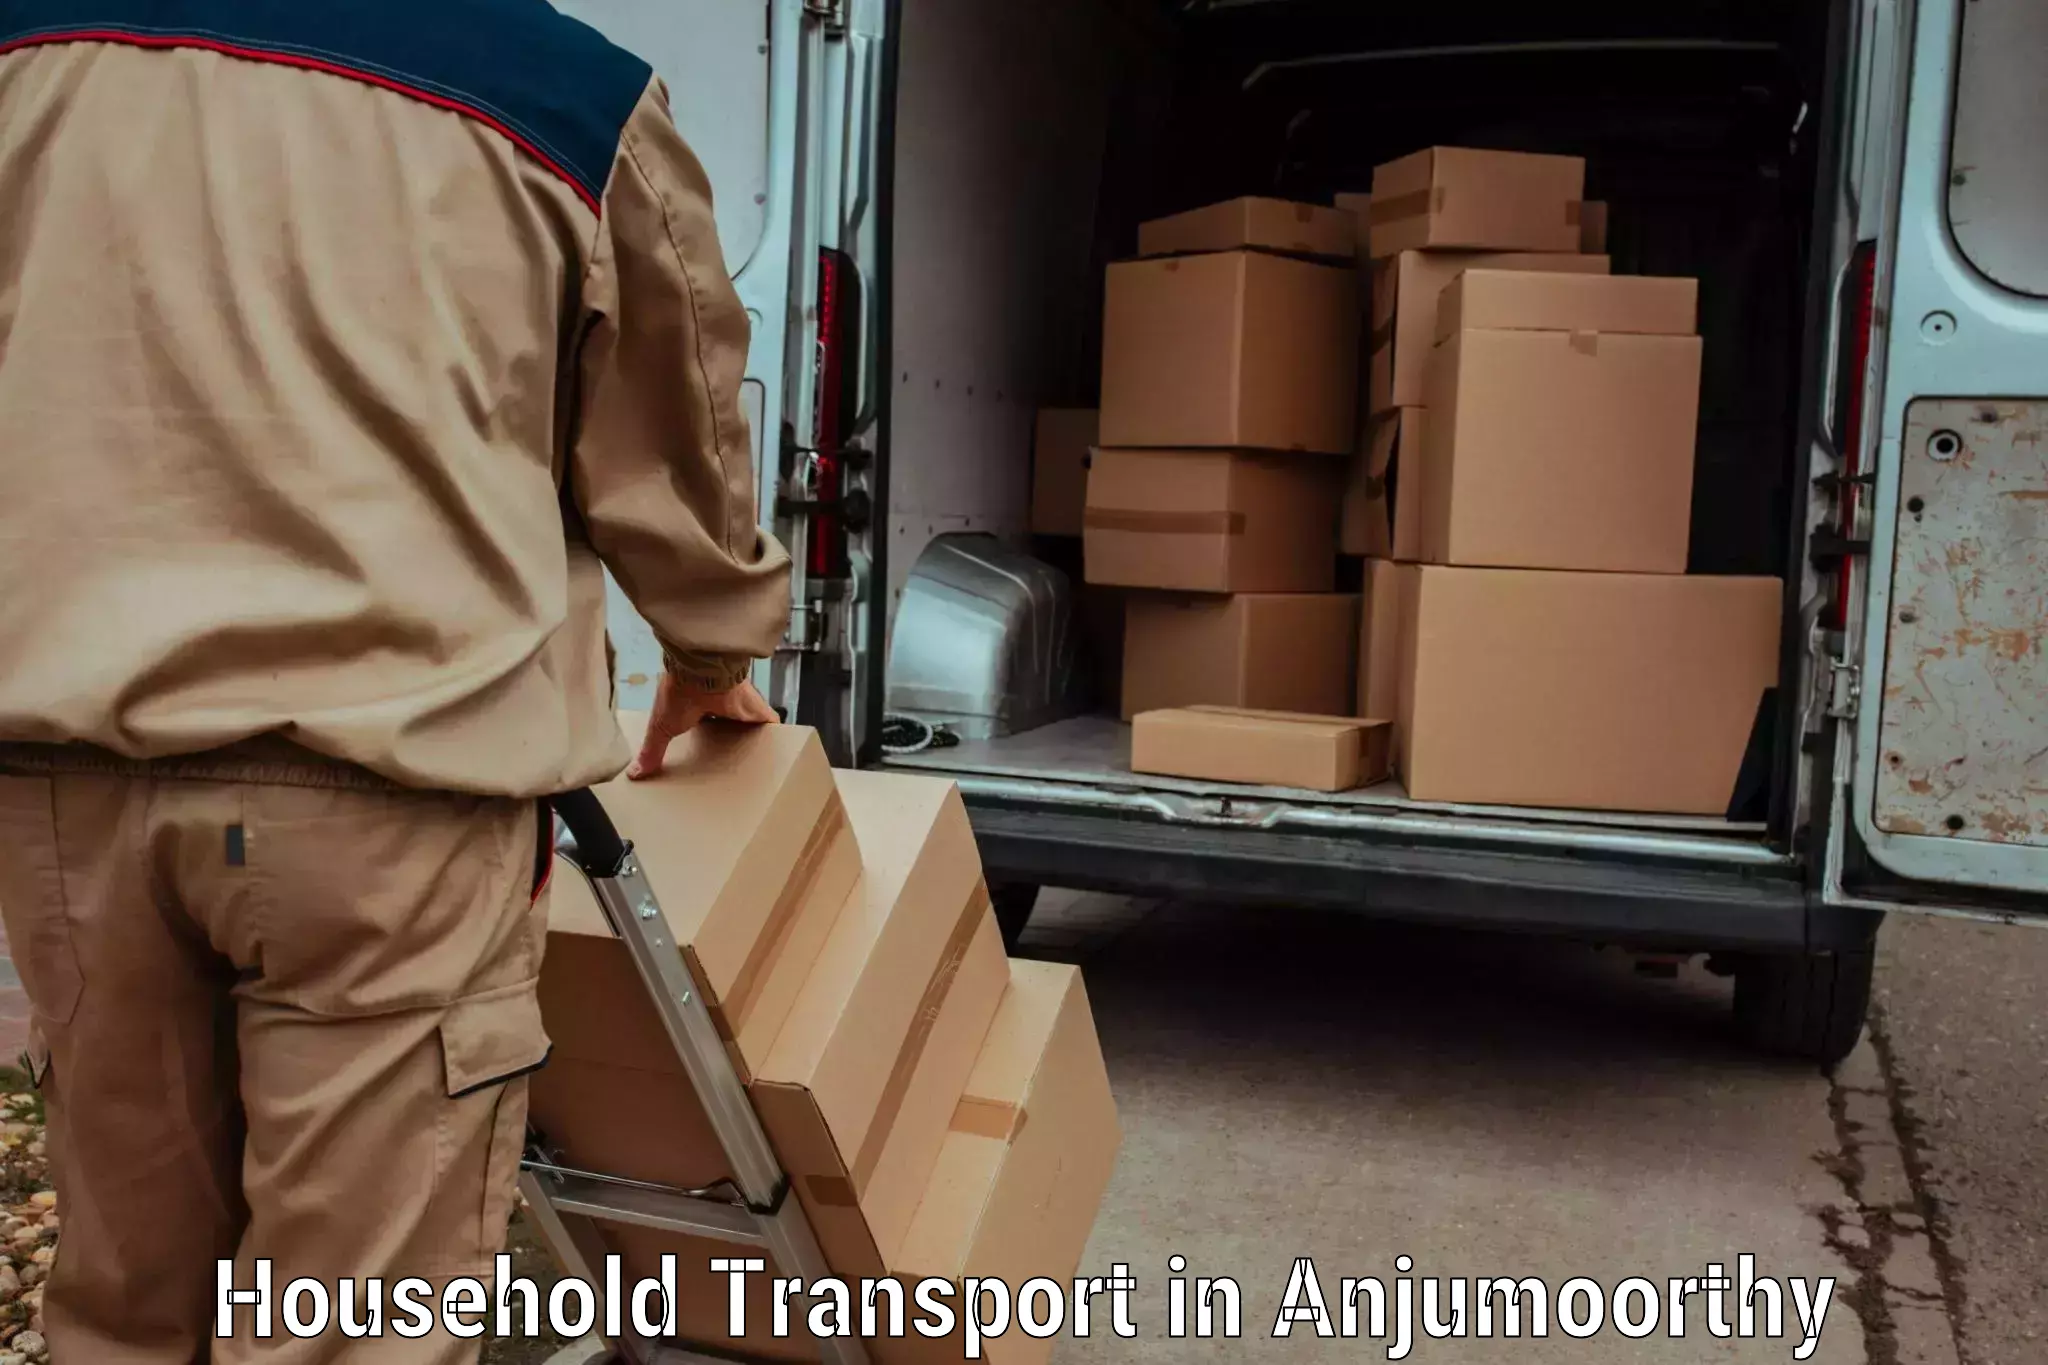 Full home relocation services in Anjumoorthy